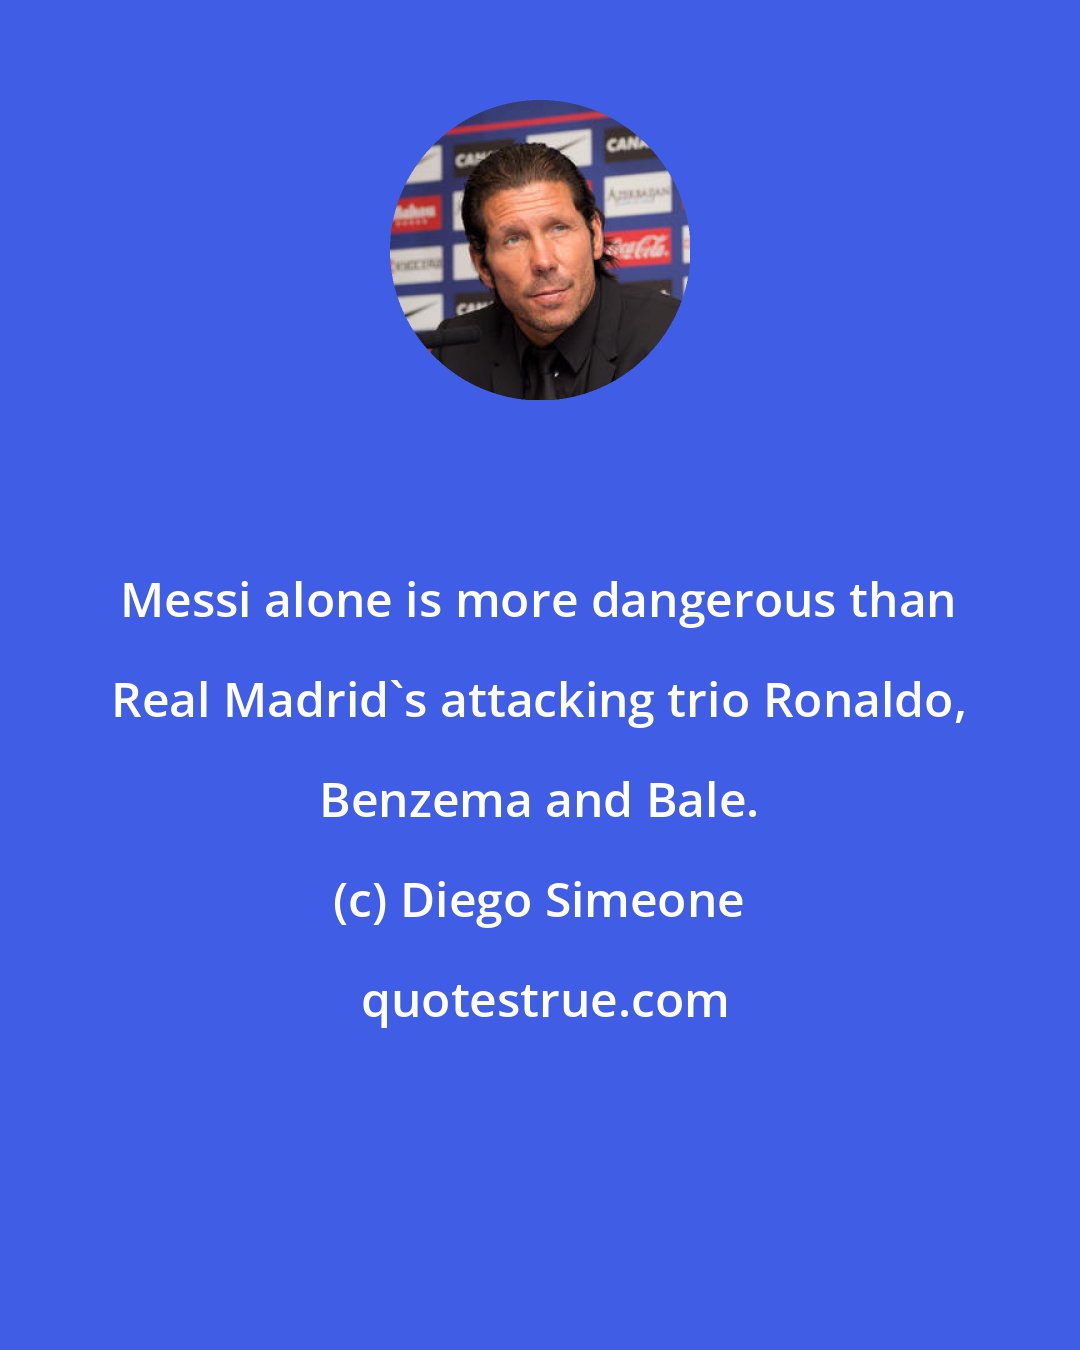 Diego Simeone: Messi alone is more dangerous than Real Madrid's attacking trio Ronaldo, Benzema and Bale.